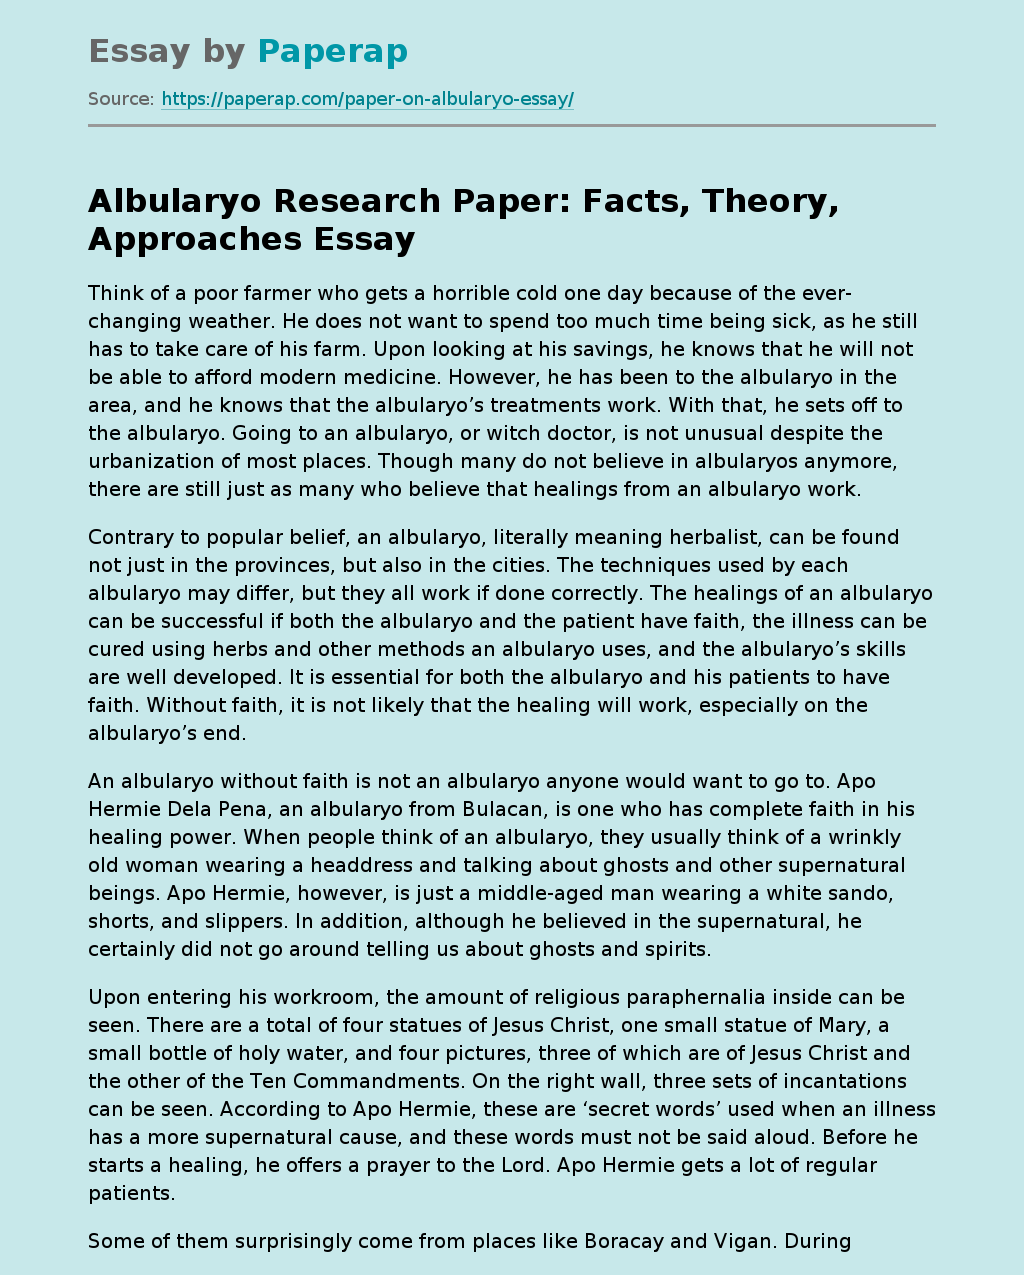 Albularyo Research Paper: Facts, Theory, Approaches